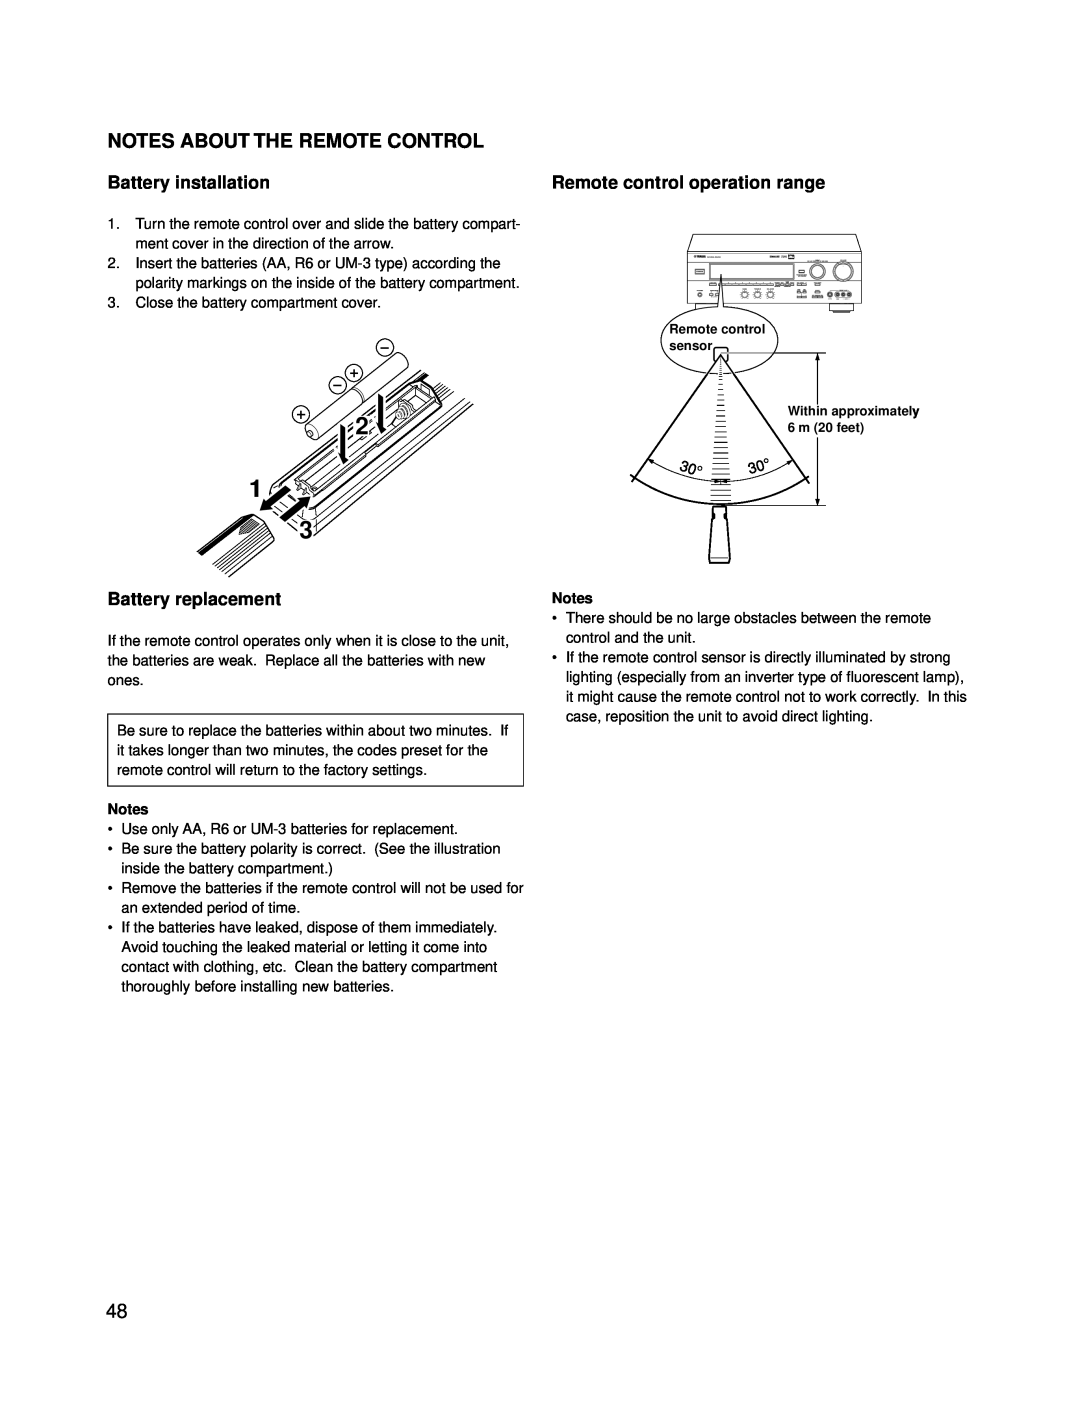 Yamaha RX-V595A Notes About The Remote Control, Battery installation, Battery replacement, Remote control operation range 